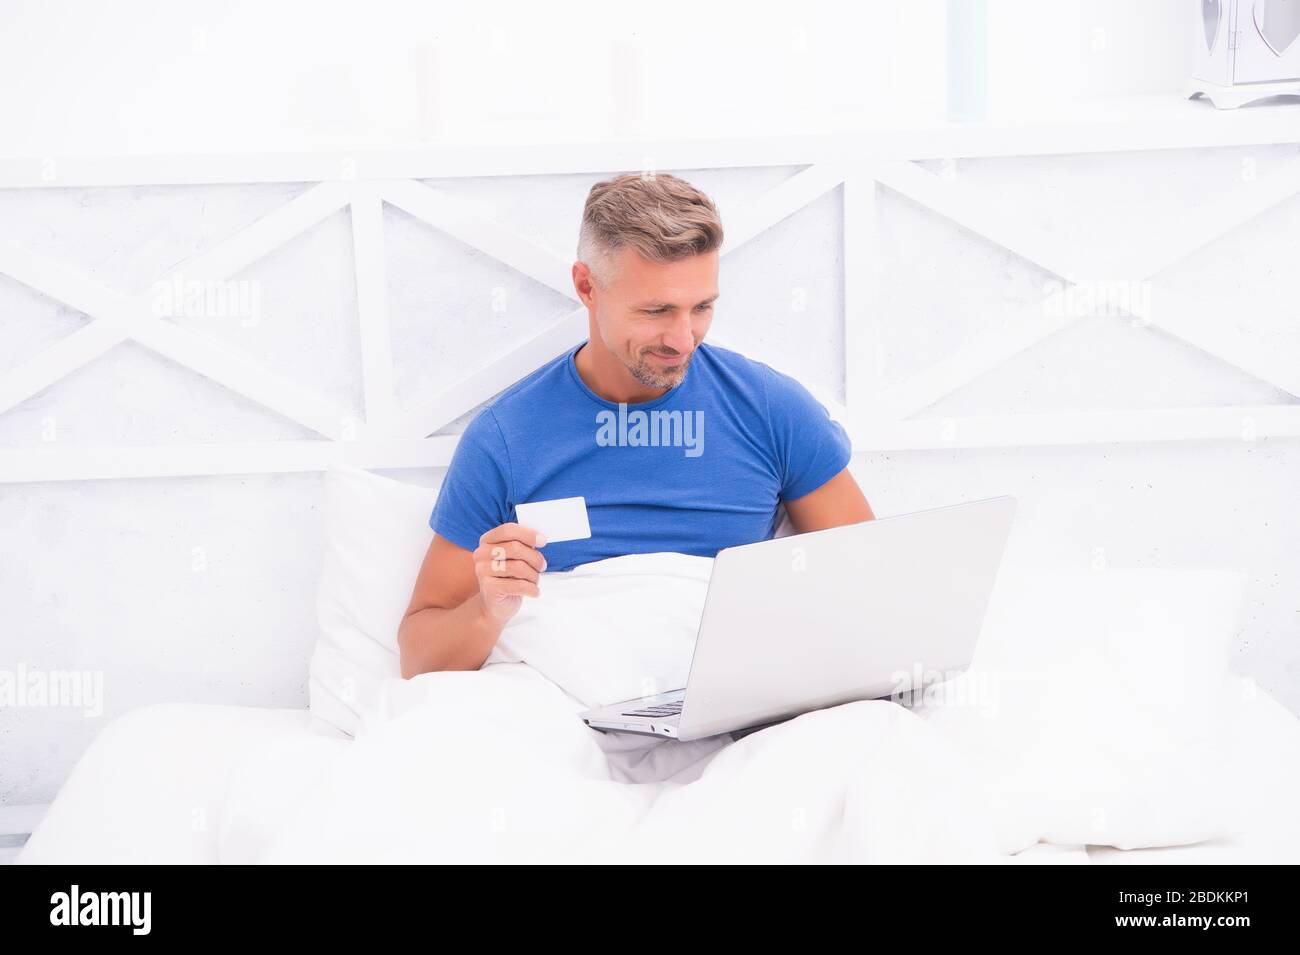 Payment and purchase. Online shopping. Work from home. Checking messages. Mature guy pajamas in bed. Businessman with computer. Hipster work on laptop. Bedroom rest. Remote job. Online communication. Stock Photo